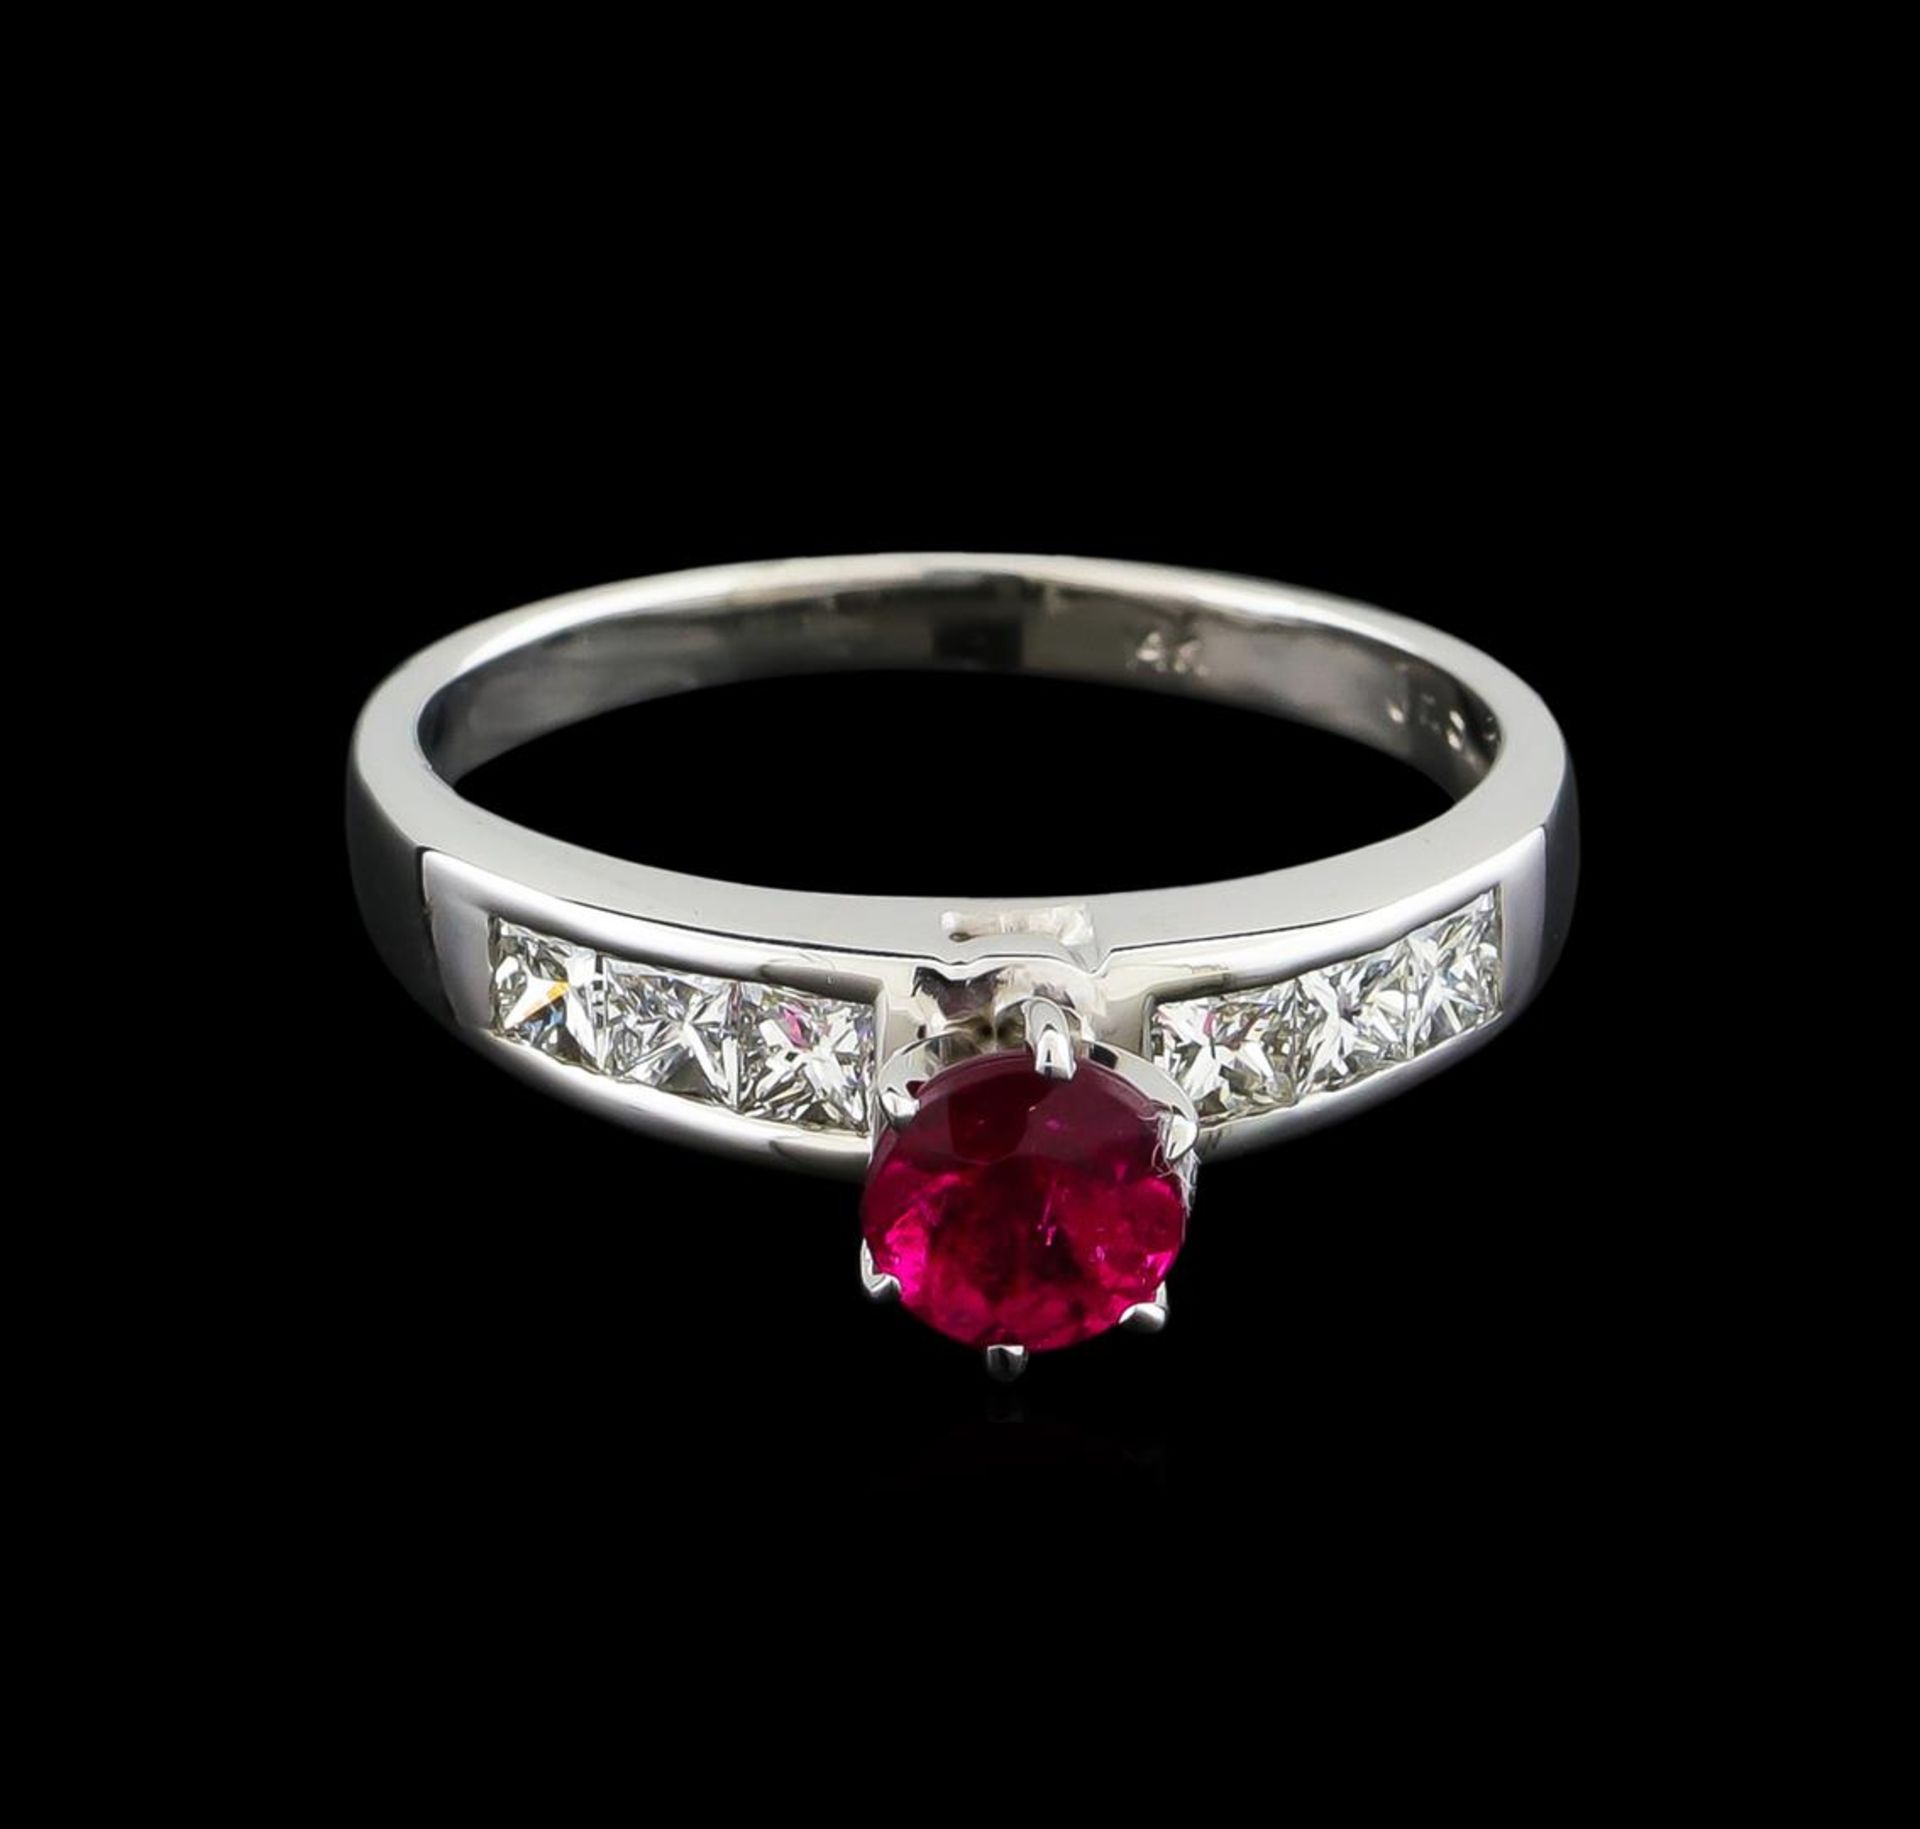 0.75 ctw Pink Tourmaline and Diamond Ring - 14KT White Gold - Image 2 of 5